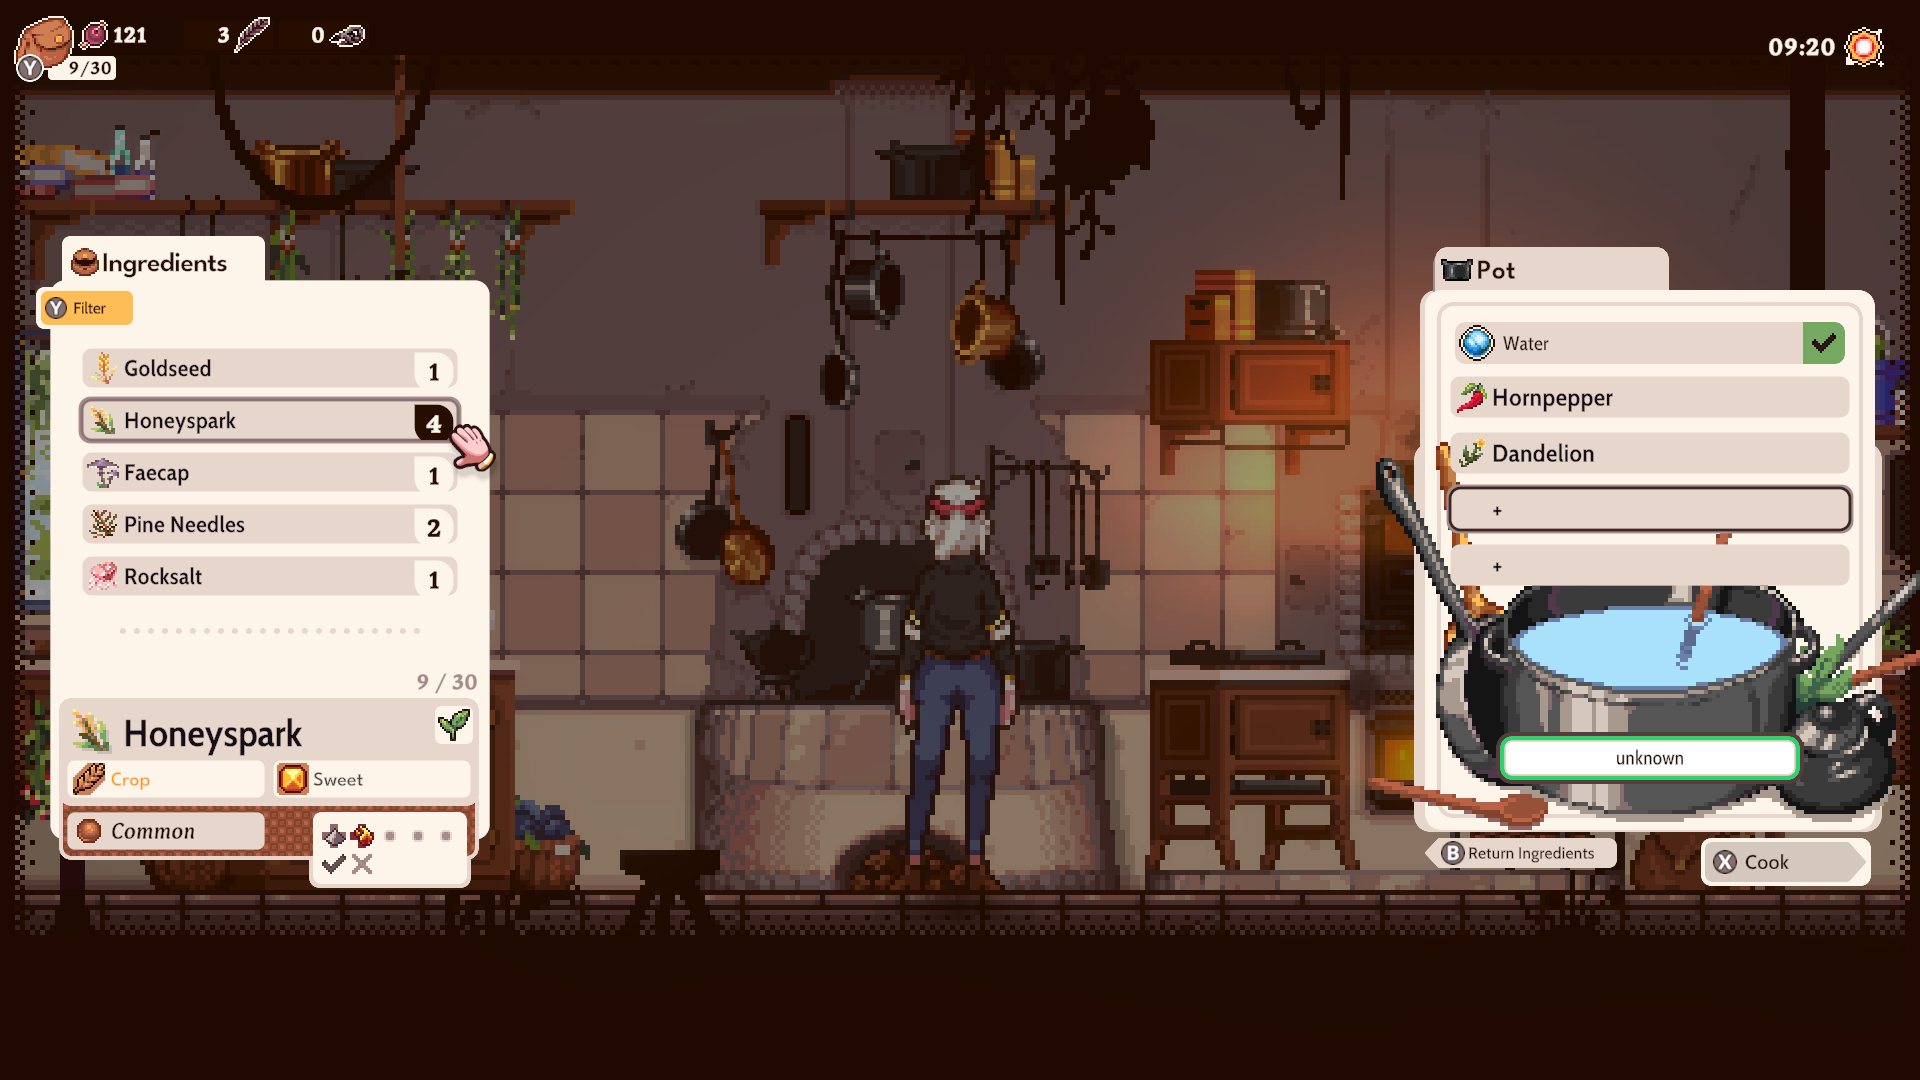 Gameplay Screenshot of Flora cooking a meal. UI elements show the cooking menu.